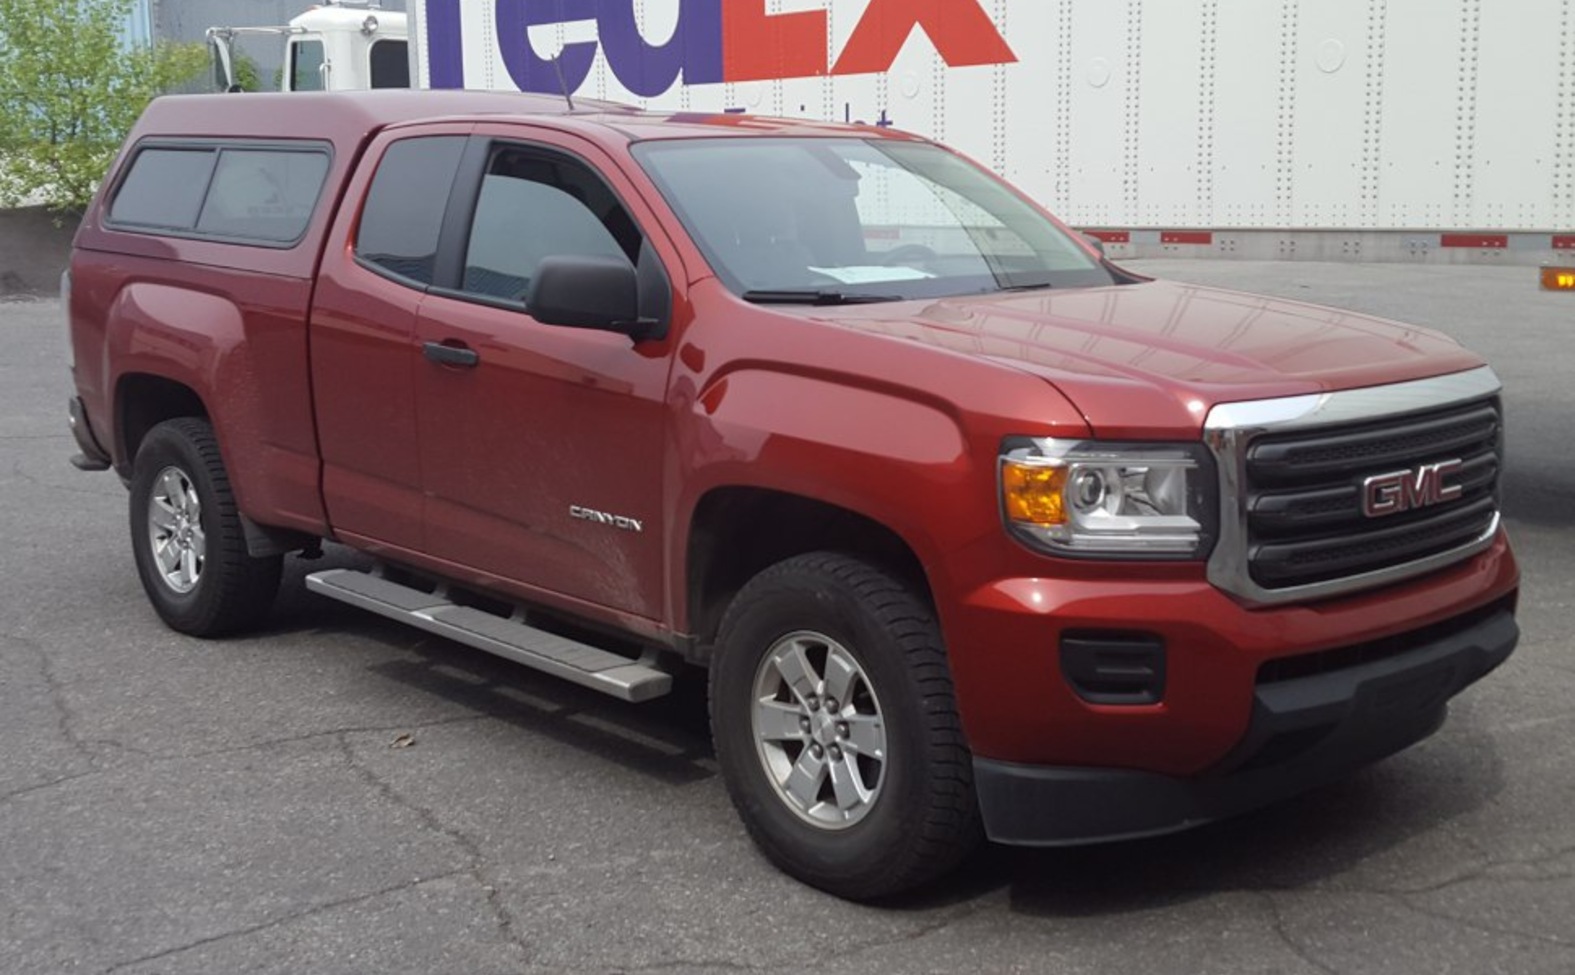 GMC Canyon II Extended cab 2.5 (200 Hp) 2015, 2016, 2017, 2018, 2019, 2020, 2021 